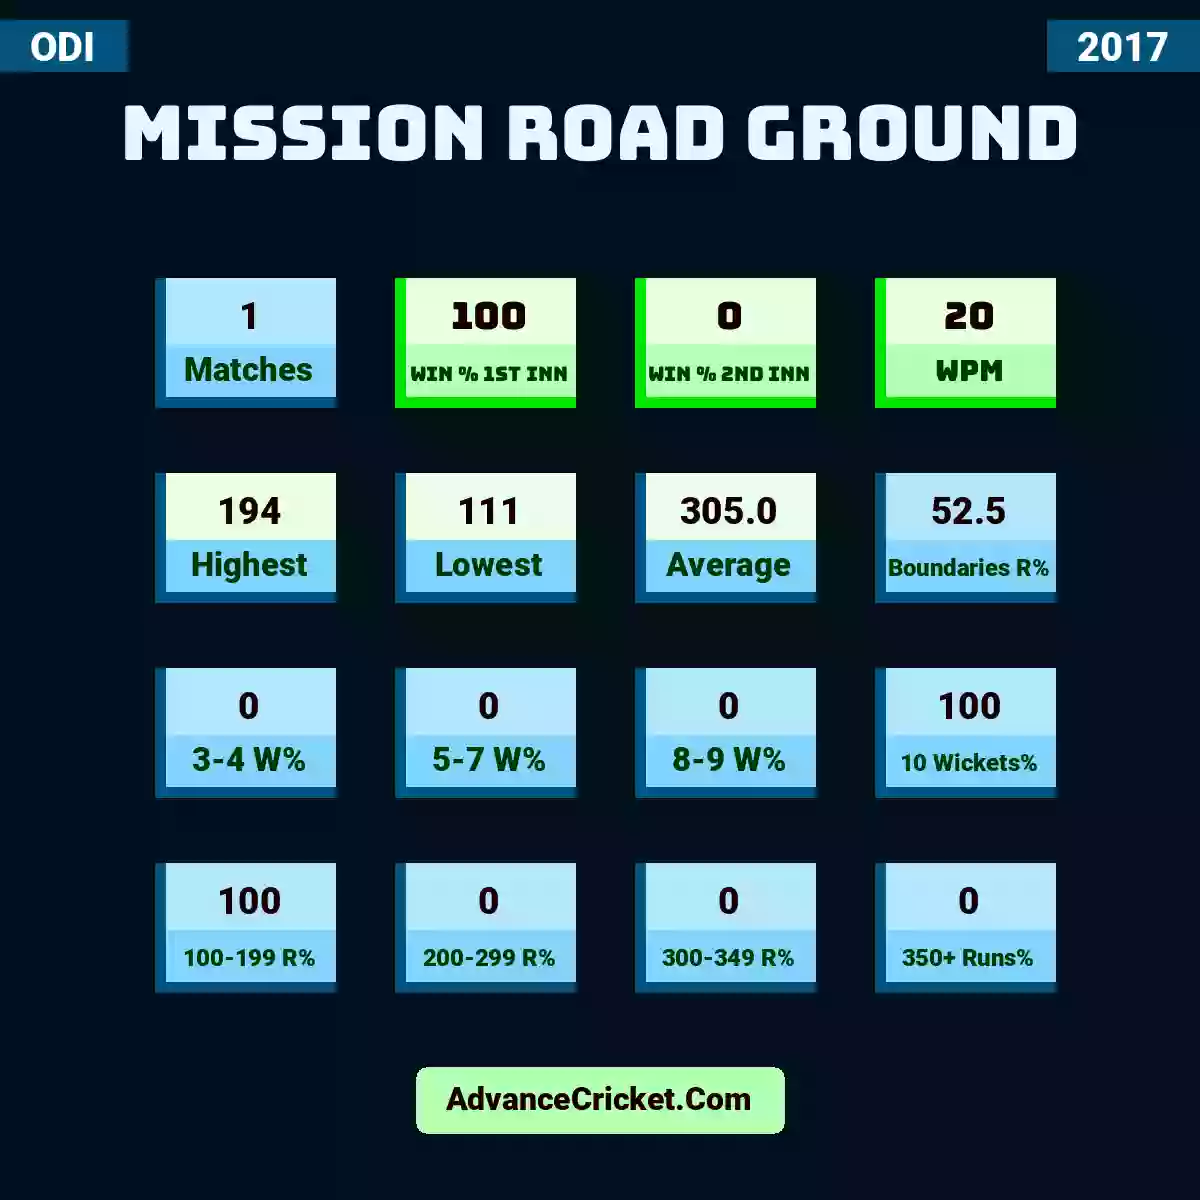 Image showing Mission Road Ground with Matches: 1, Win % 1st Inn: 100, Win % 2nd Inn: 0, WPM: 20, Highest: 194, Lowest: 111, Average: 305.0, Boundaries R%: 52.5, 3-4 W%: 0, 5-7 W%: 0, 8-9 W%: 0, 10 Wickets%: 100, 100-199 R%: 100, 200-299 R%: 0, 300-349 R%: 0, 350+ Runs%: 0.